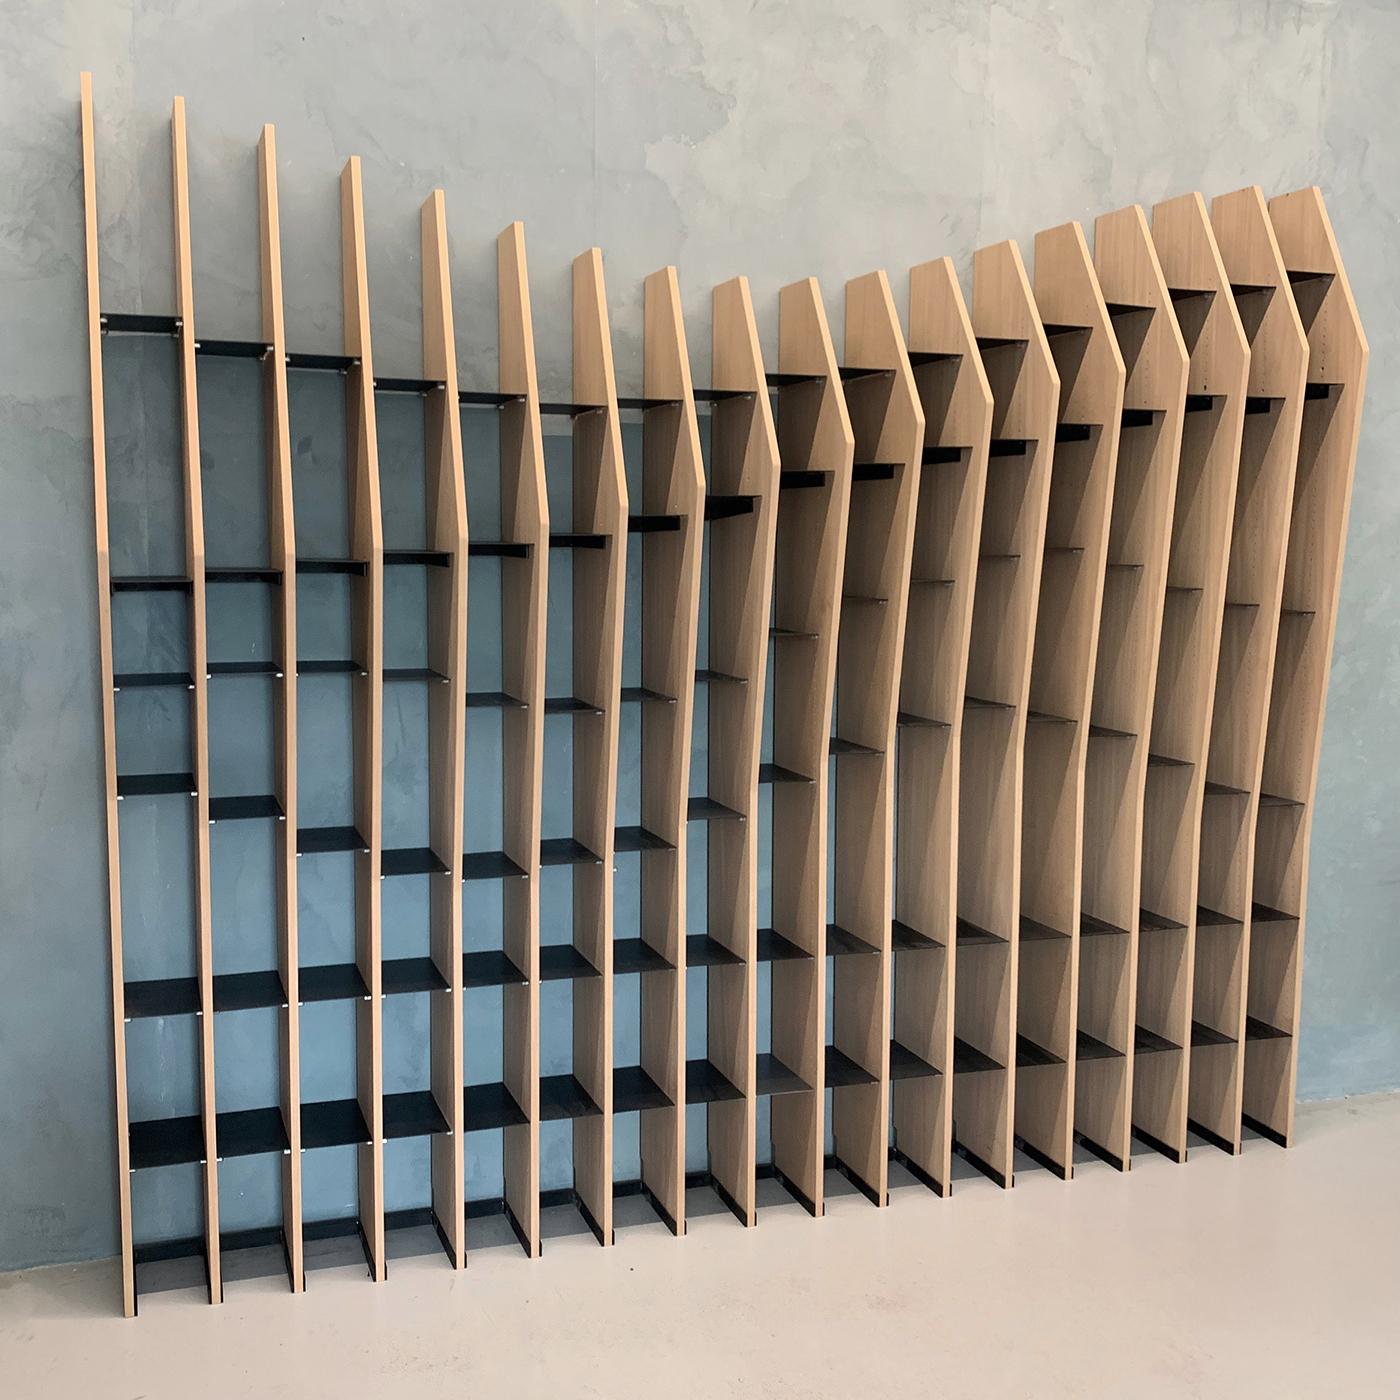 This visually striking, geometric bookshelf is defined by its extremely dynamic appearance, adding a touch of energy and movement to any environment. It is perfect for a home, hospitality environment or business, and can be used to divide an open